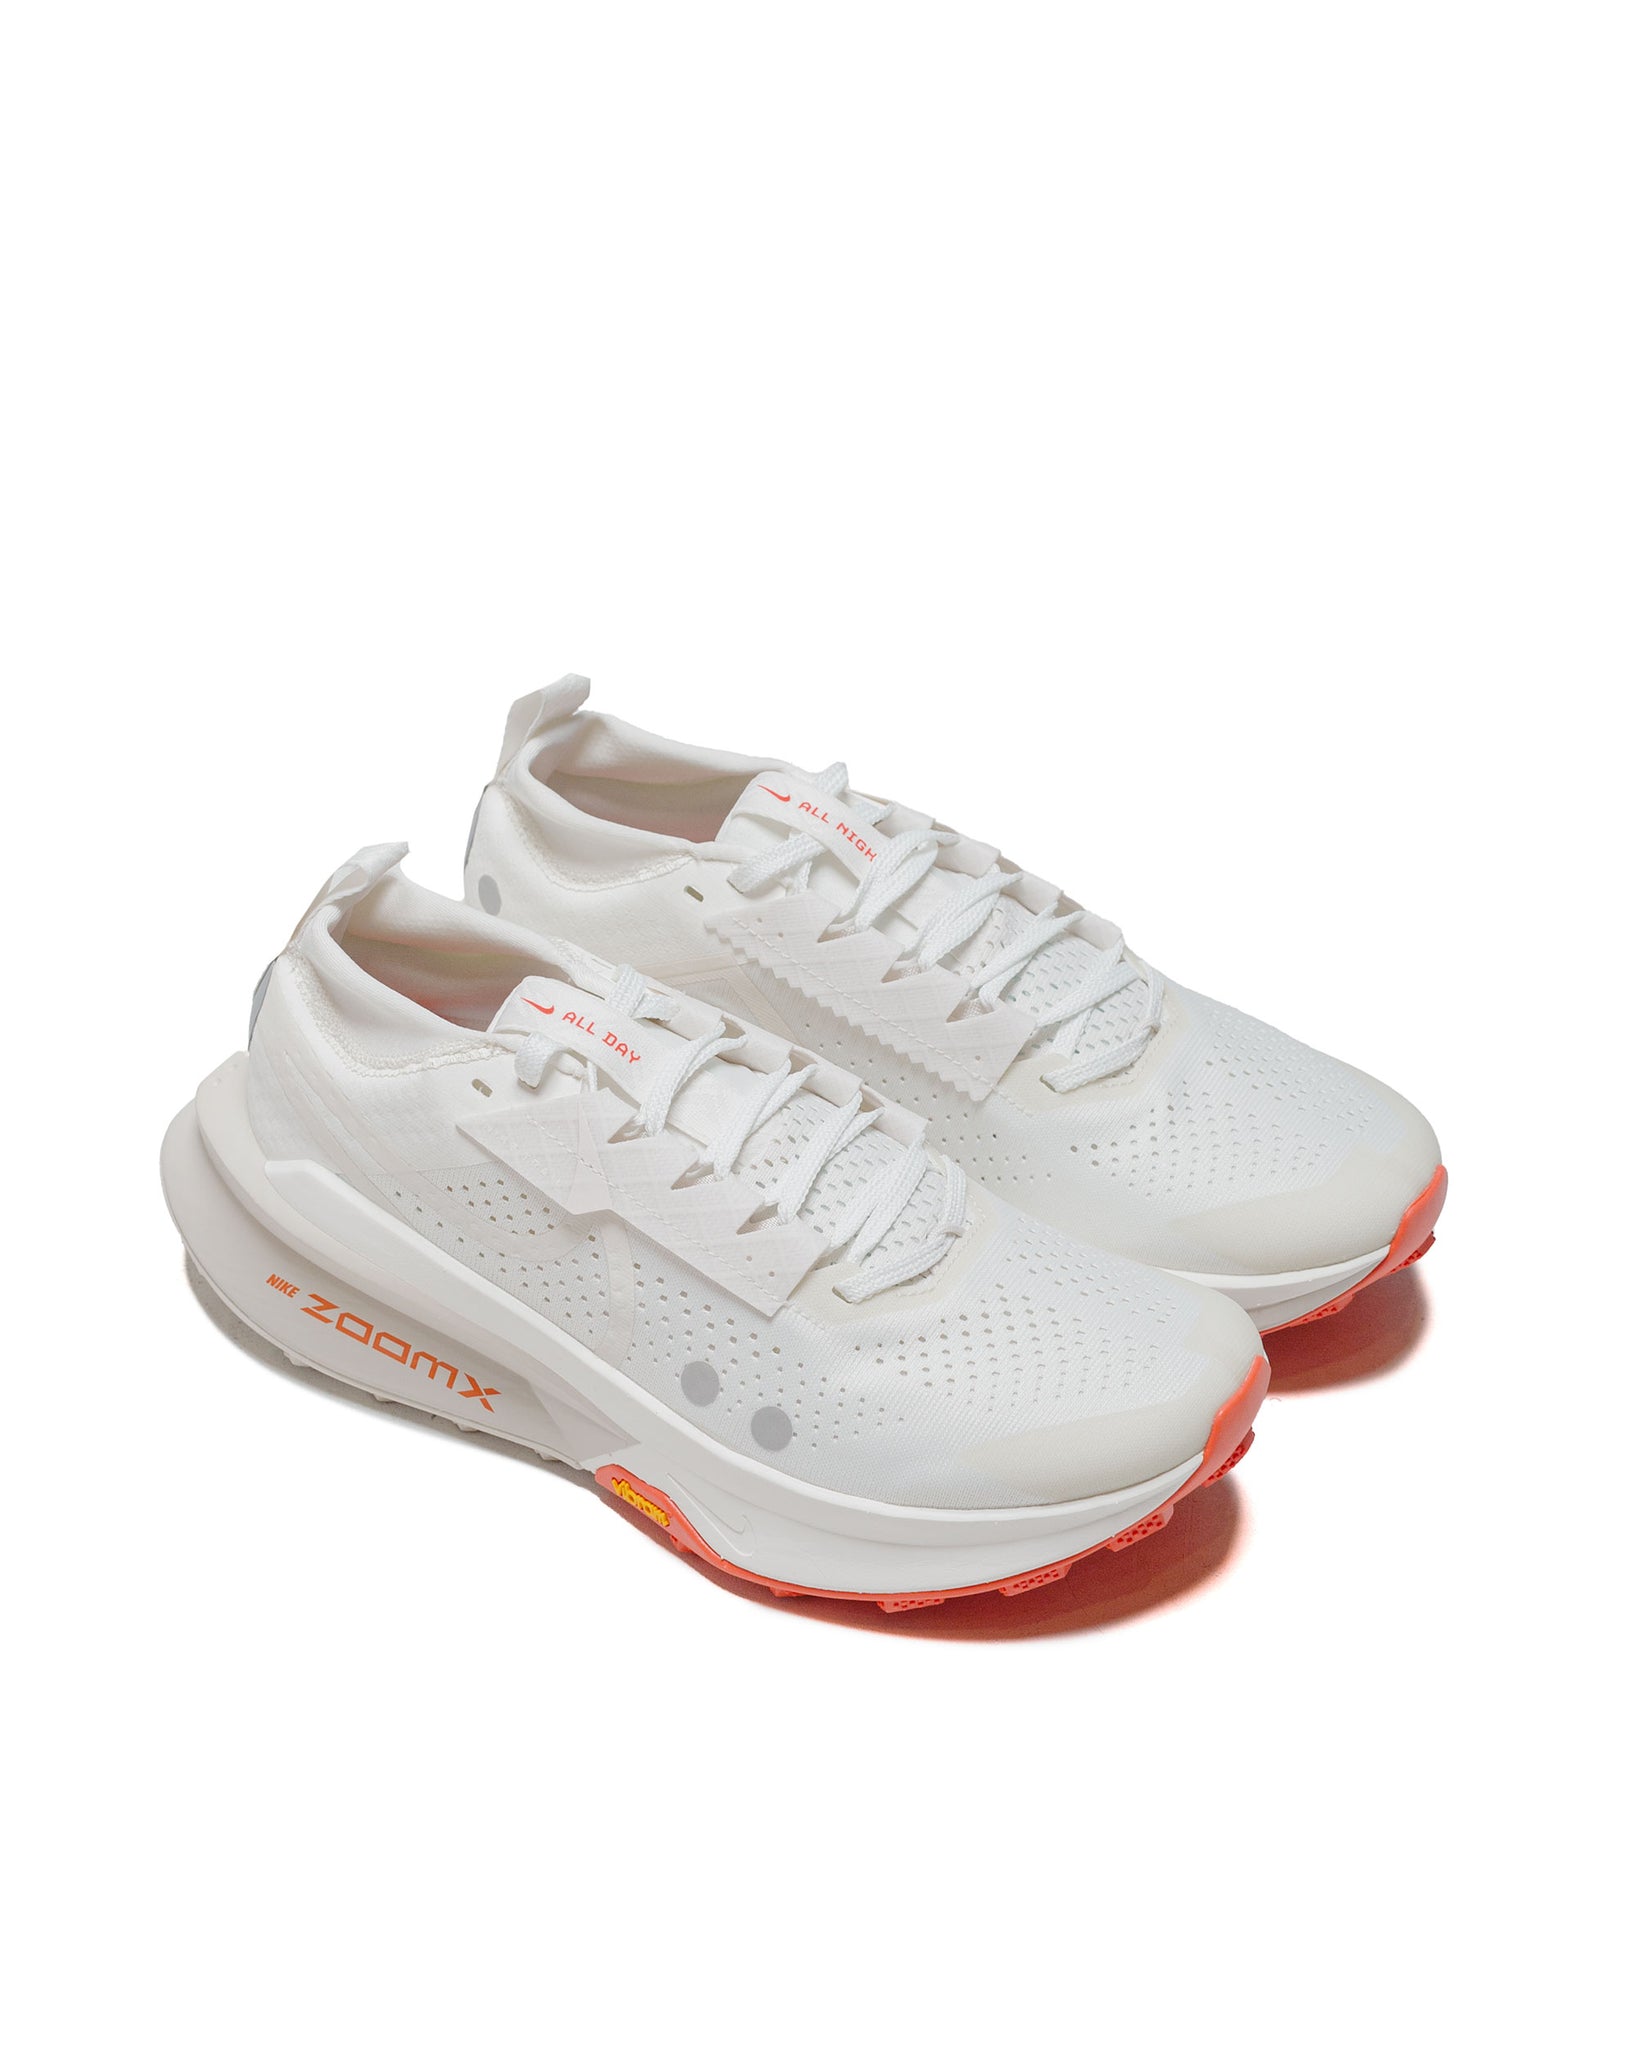 Nike ZoomX Invincible Trail Sail/Picante Red side